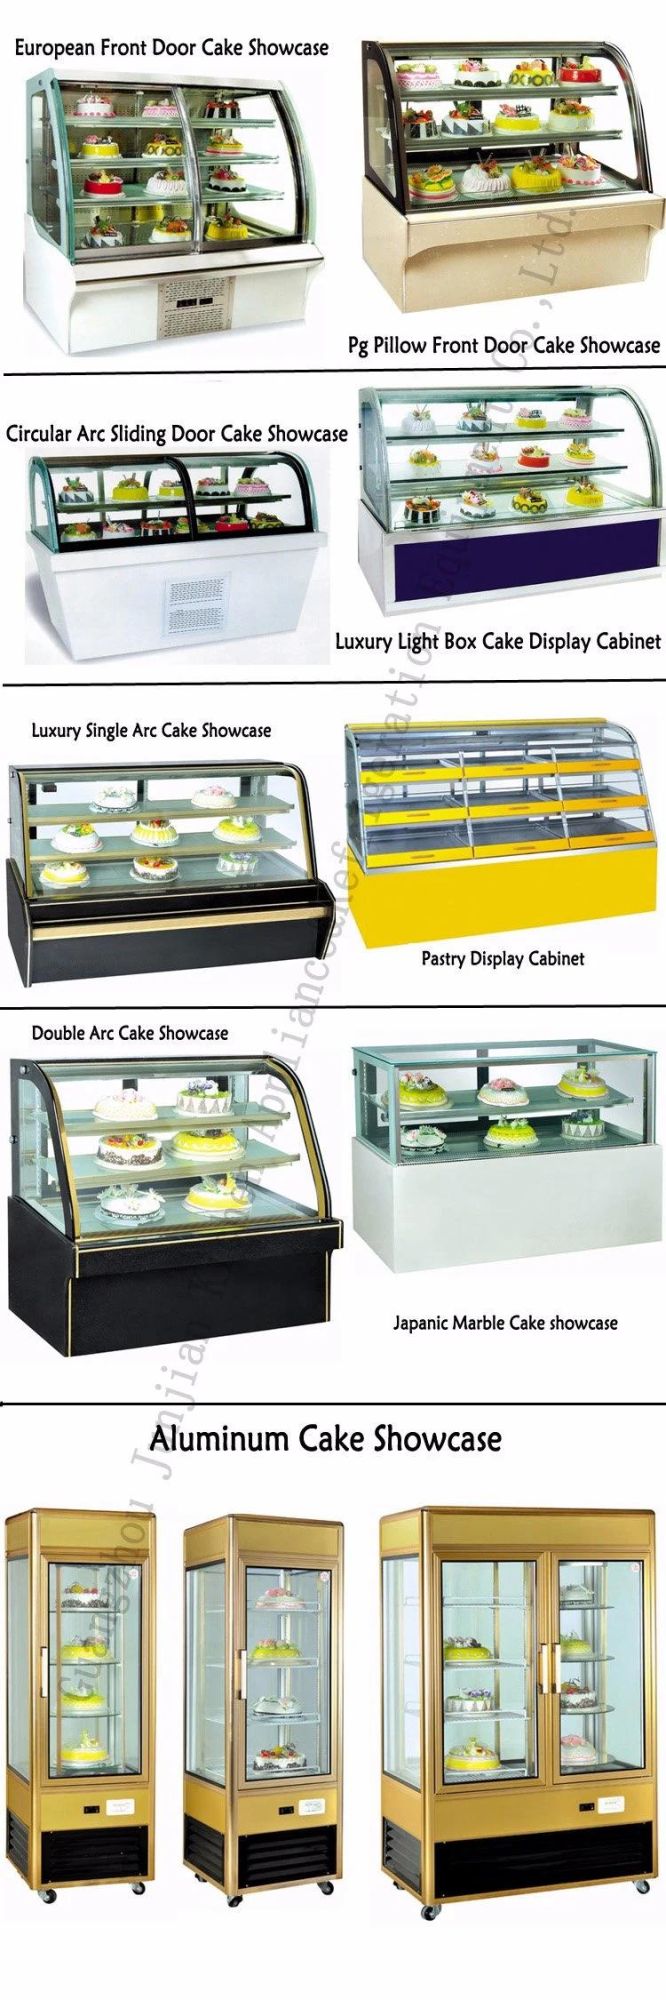 Rg Pillow Foot Commercial Cake Cooler Display Cabinet